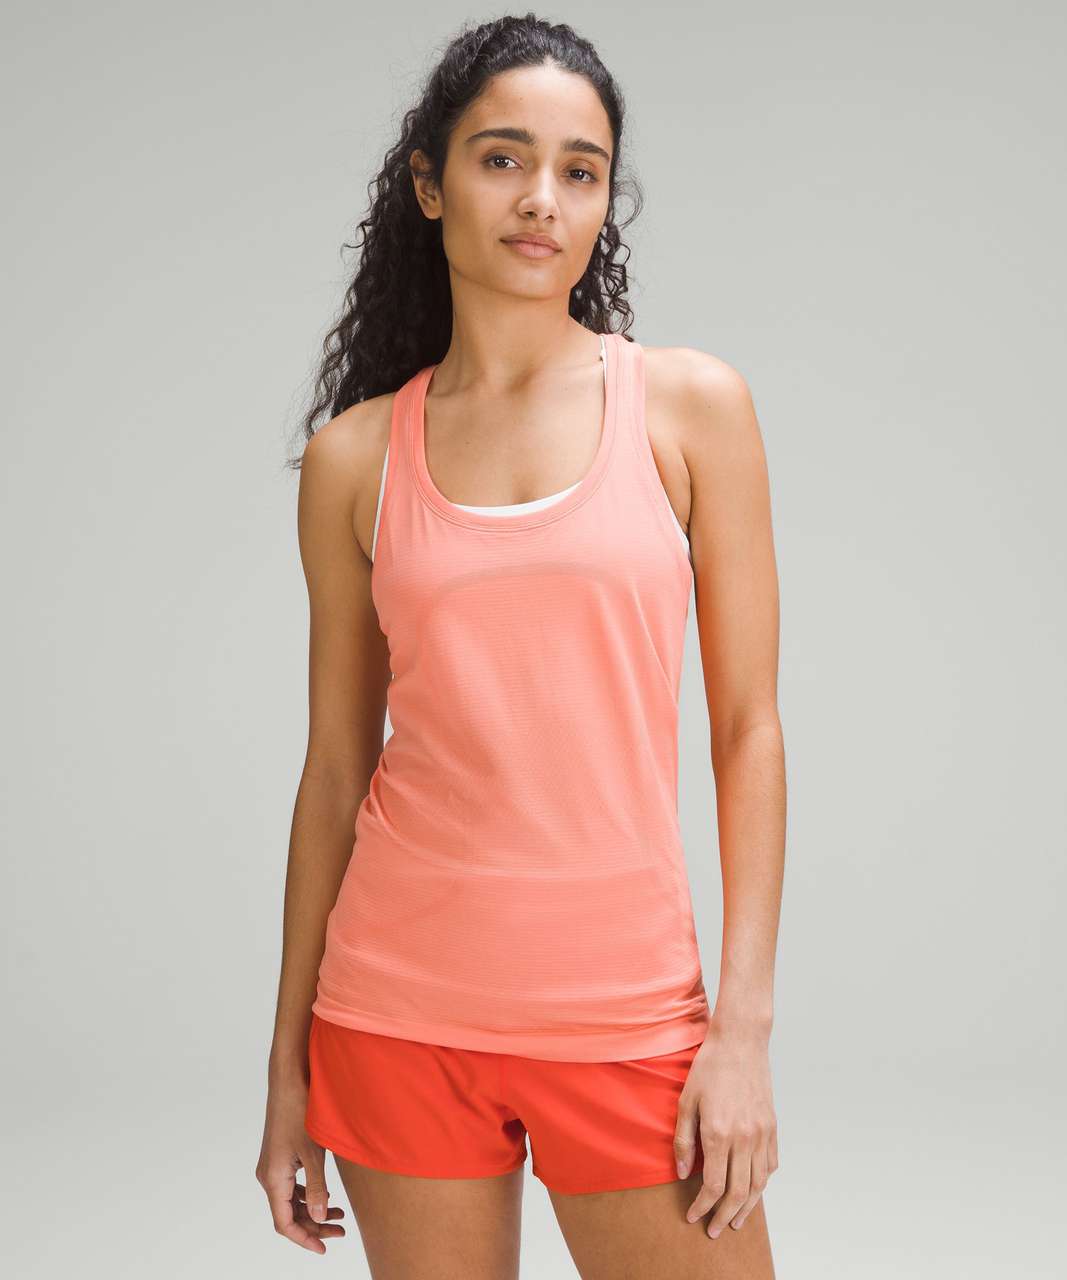 Lululemon Swiftly Tech Racerback Tank Top 2.0 - Sunny Coral / Sunny Coral